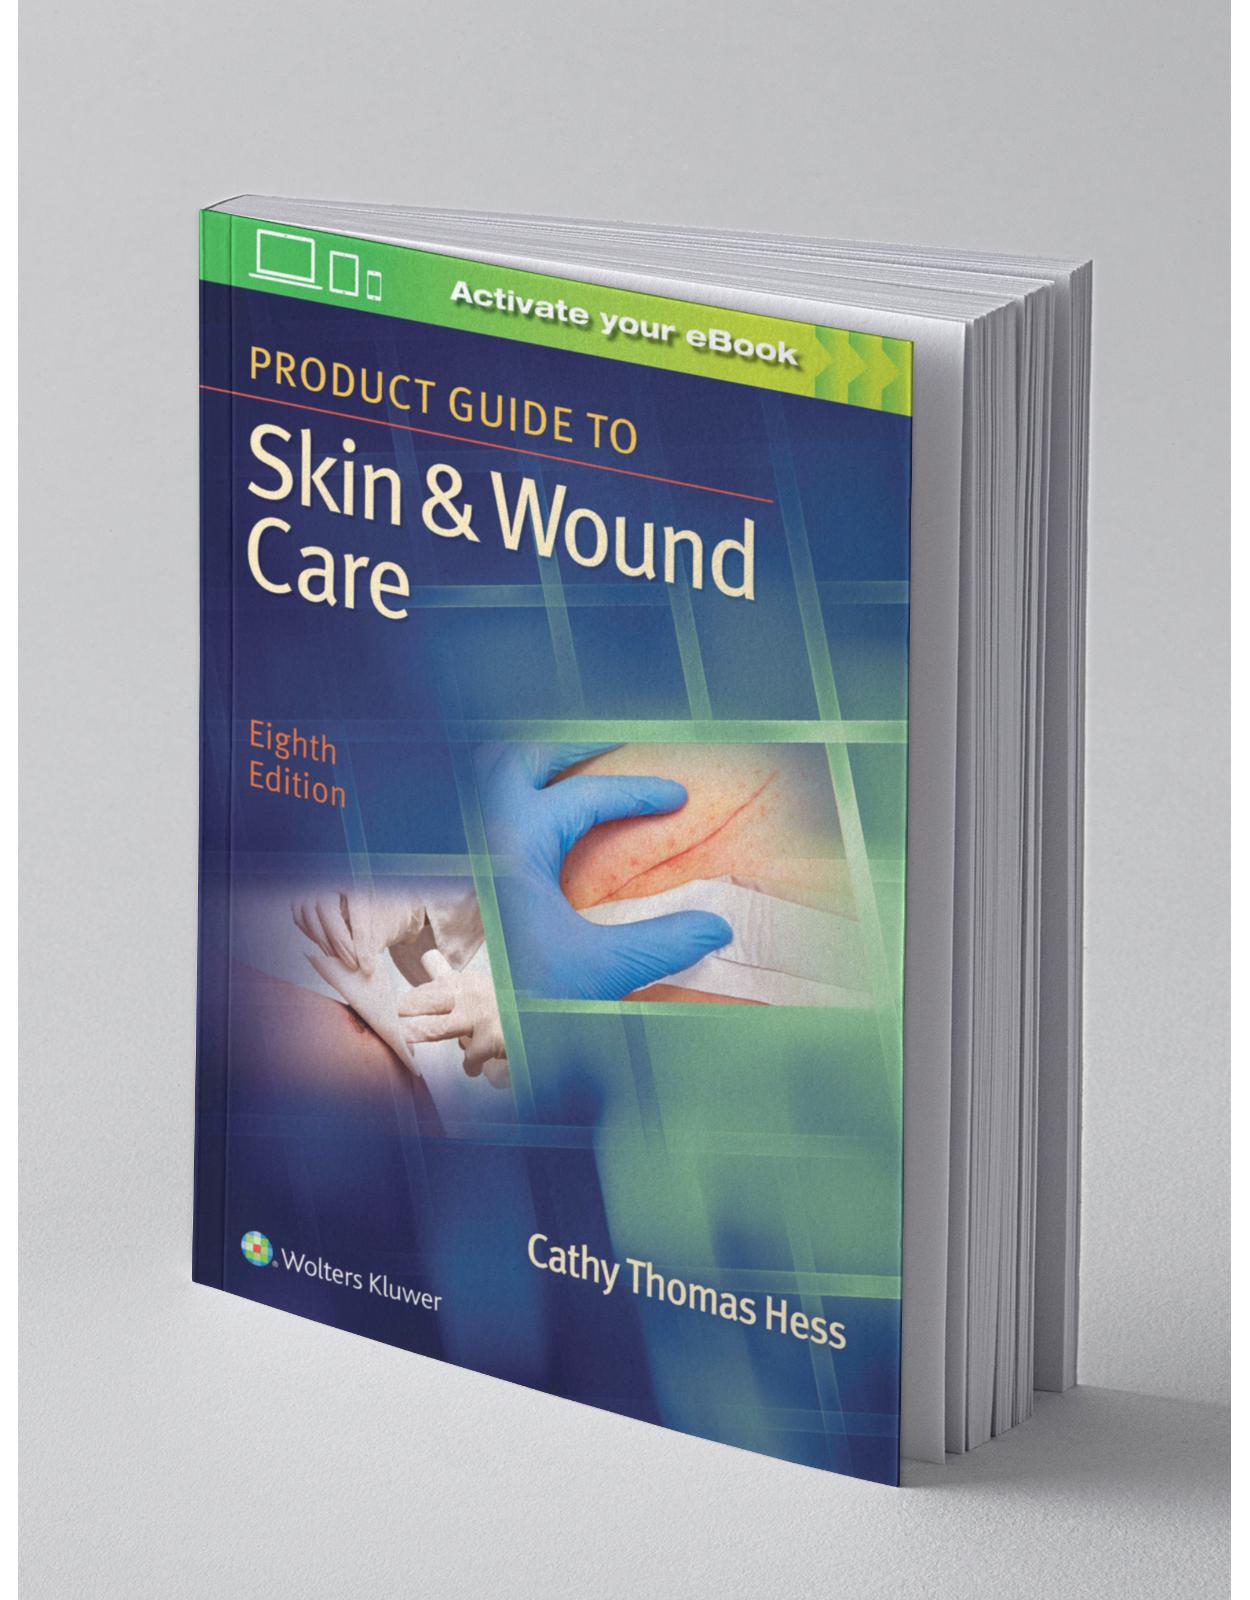 Product Guide to Skin & Wound Care 